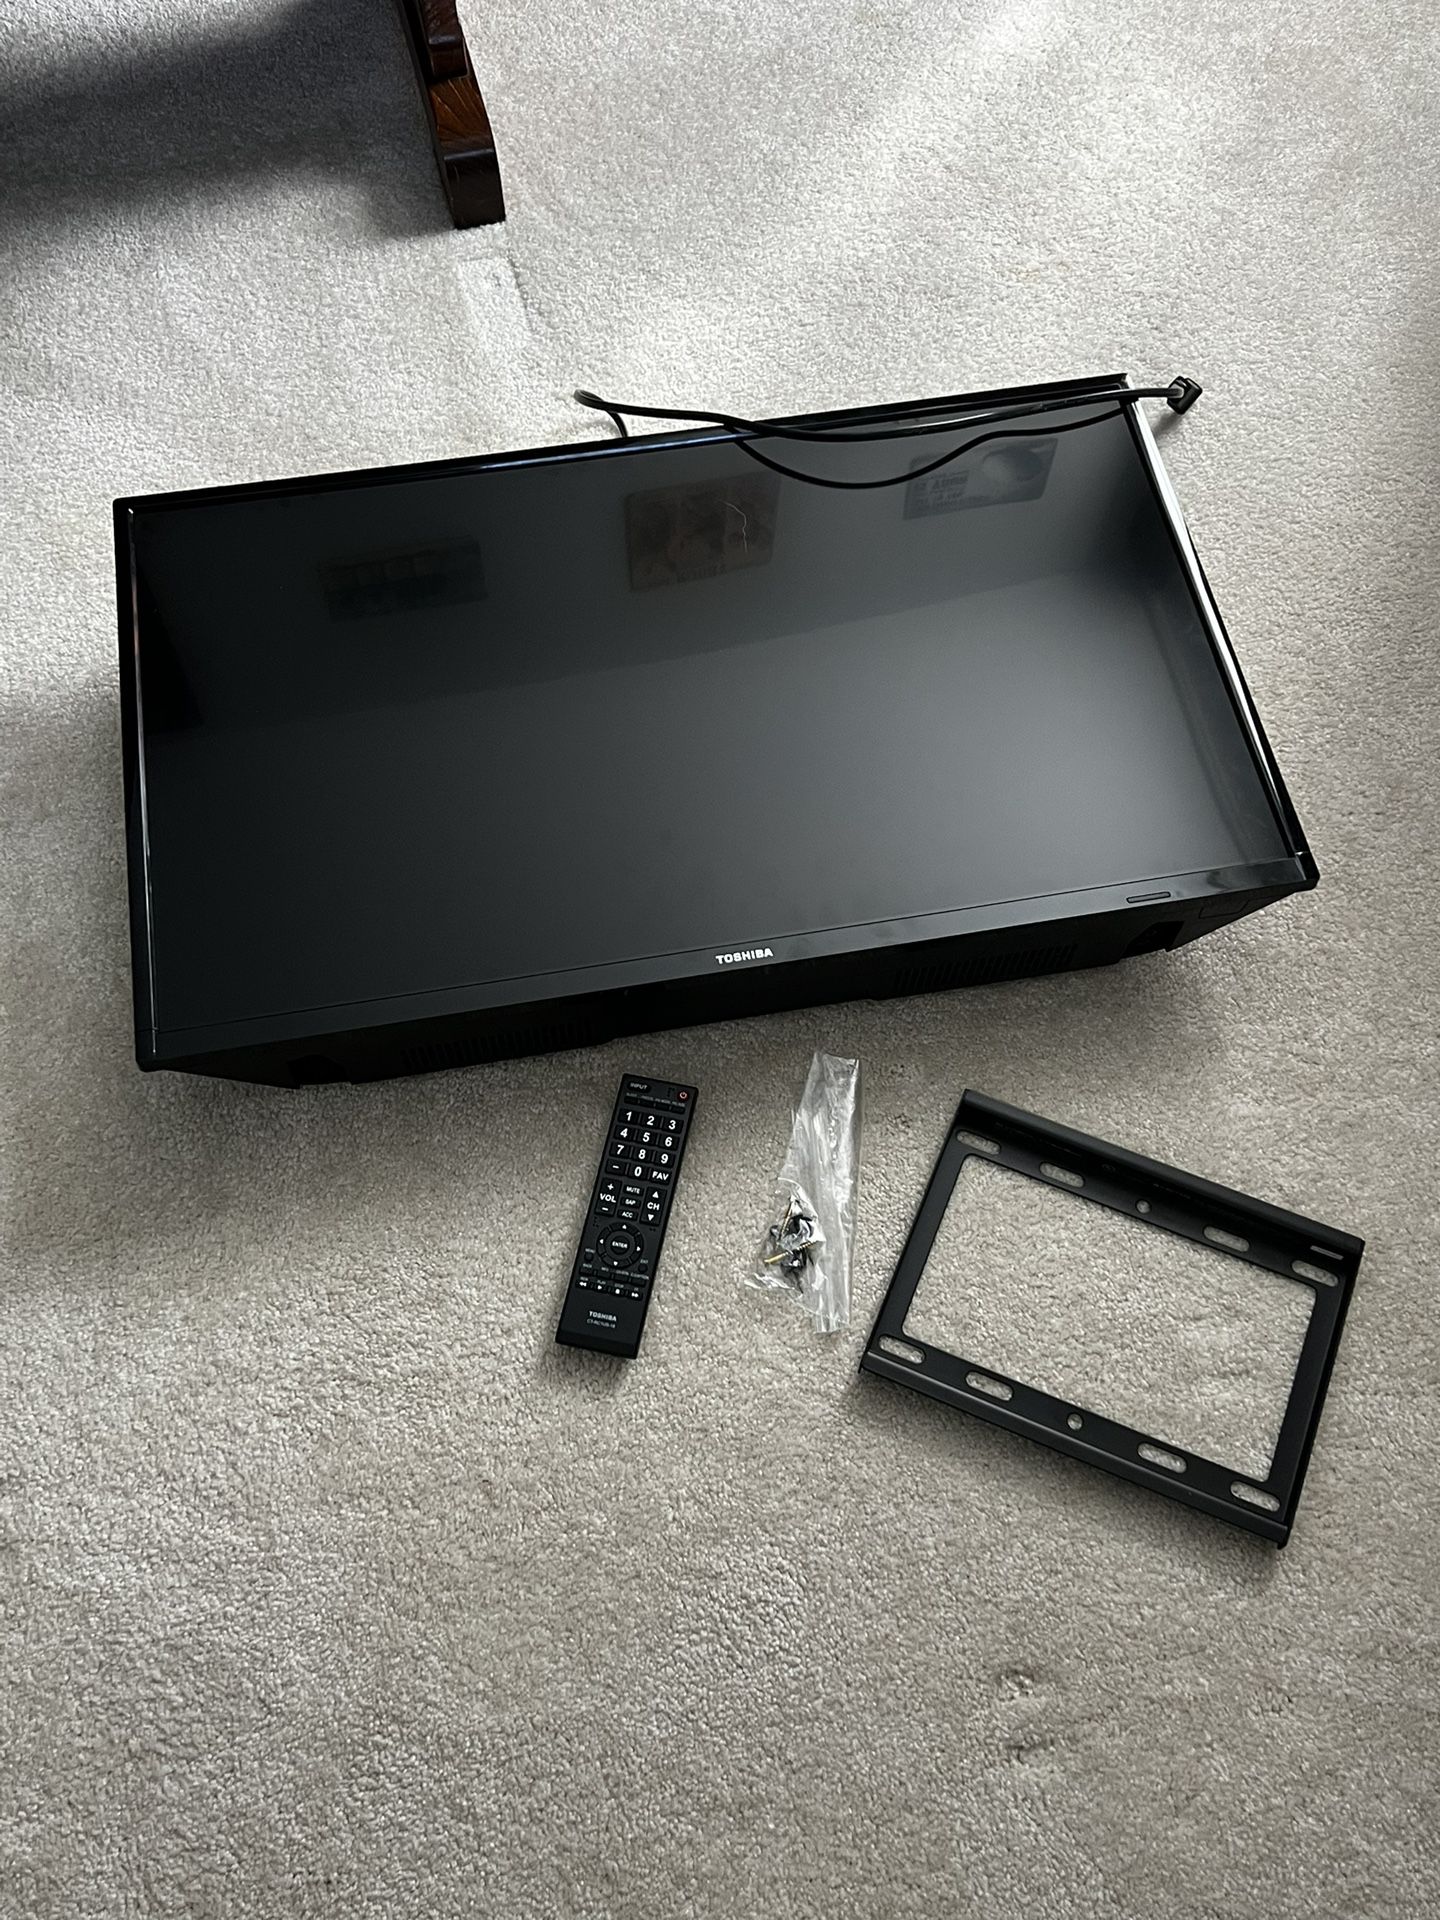 32in Toshiba Flat Screen TV with Mount Kit